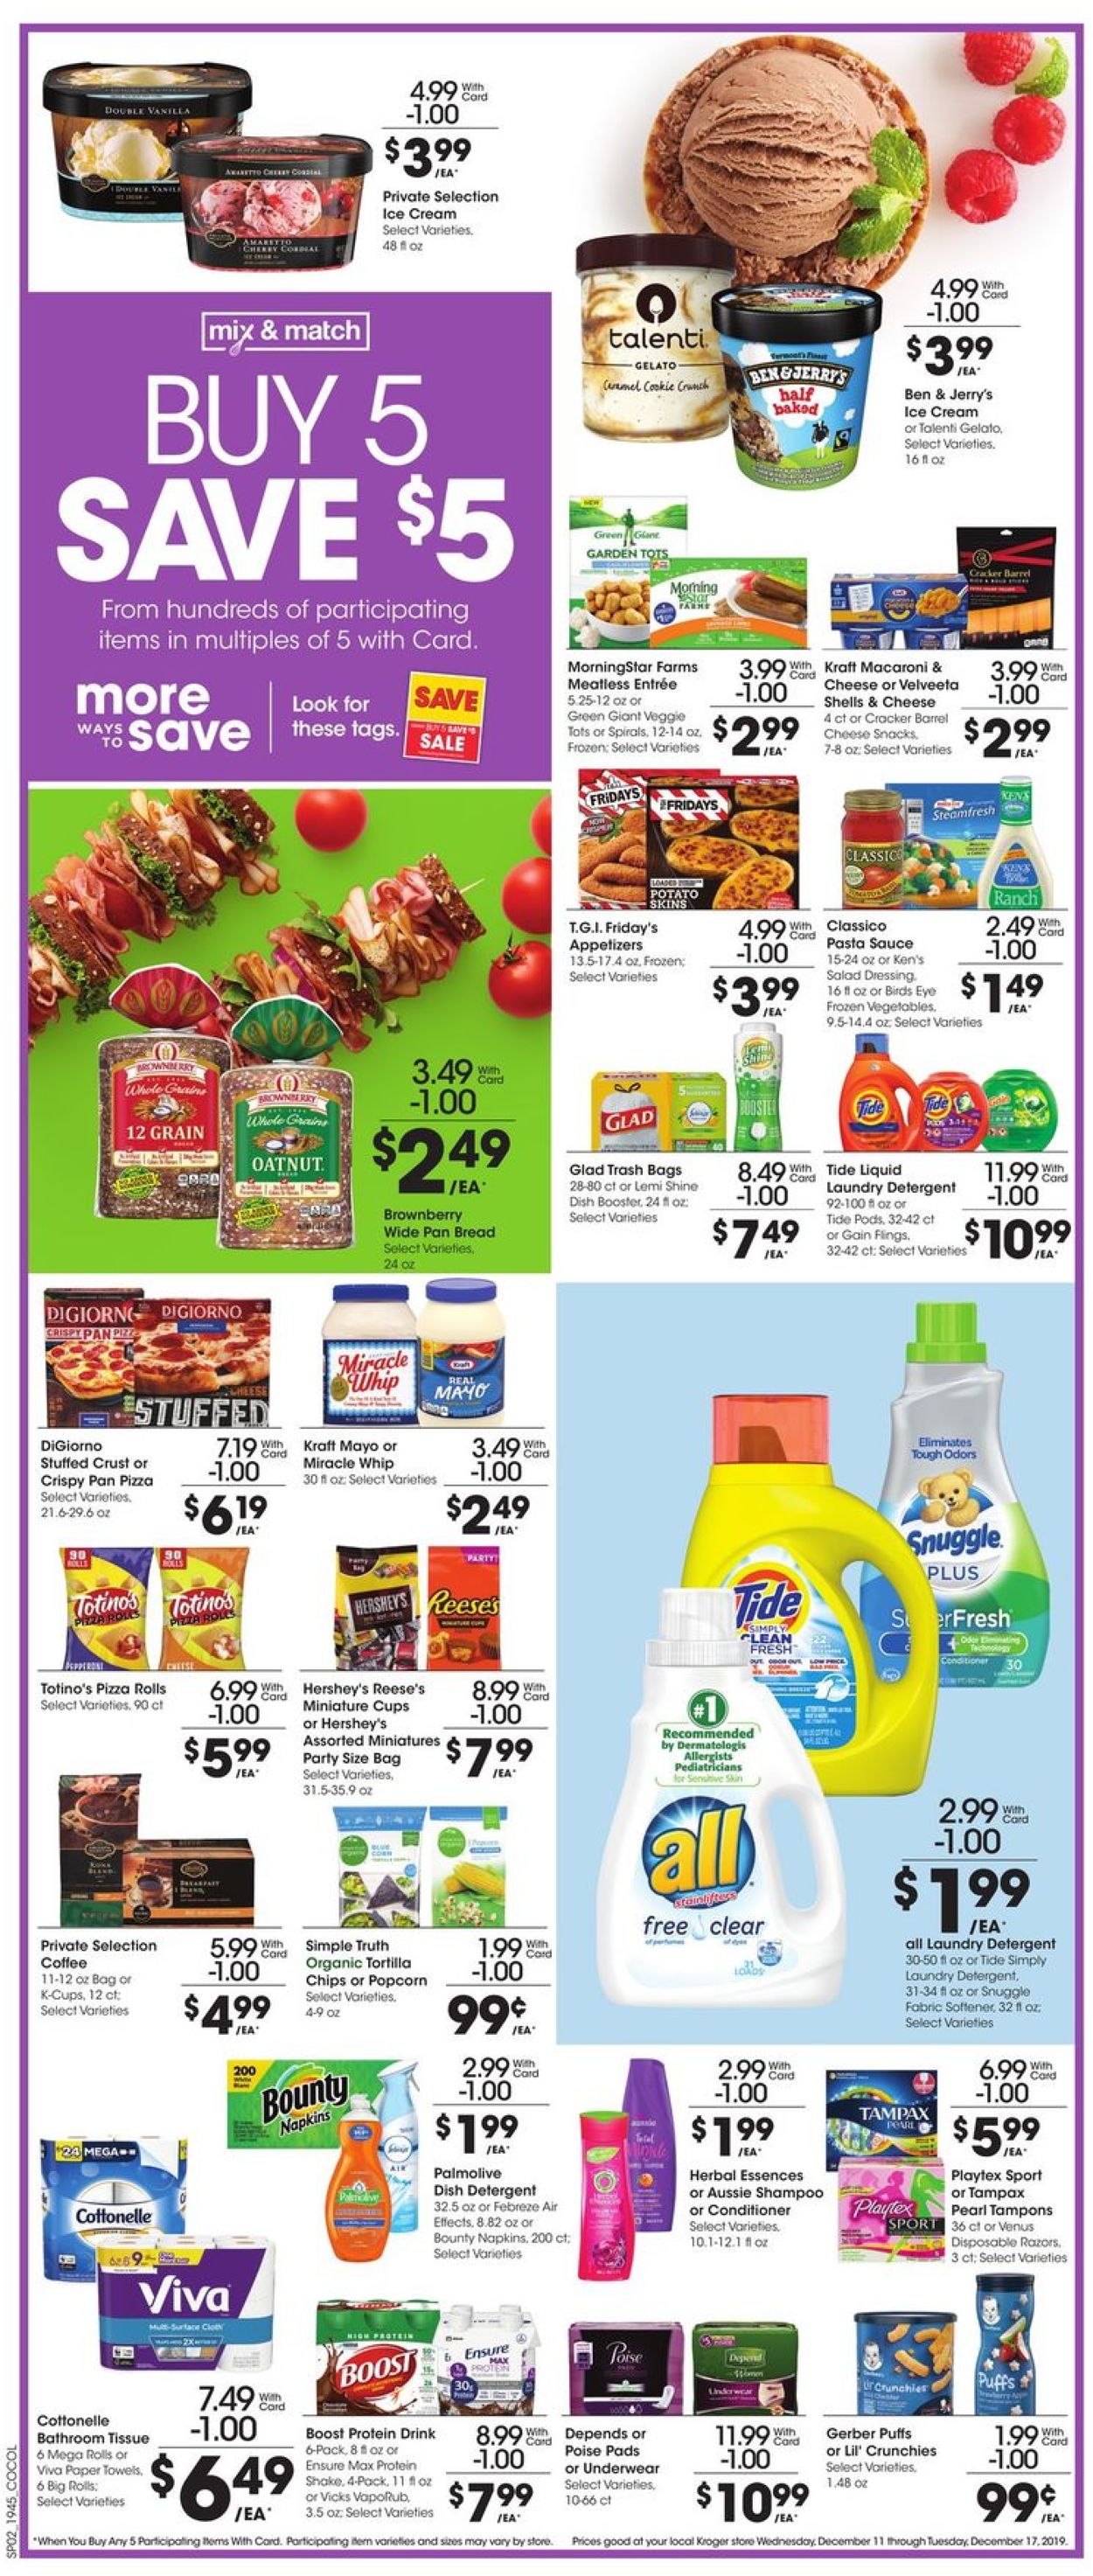 Kroger - Holiday Ad 2019 Current weekly ad 12/11 - 12/17 ...